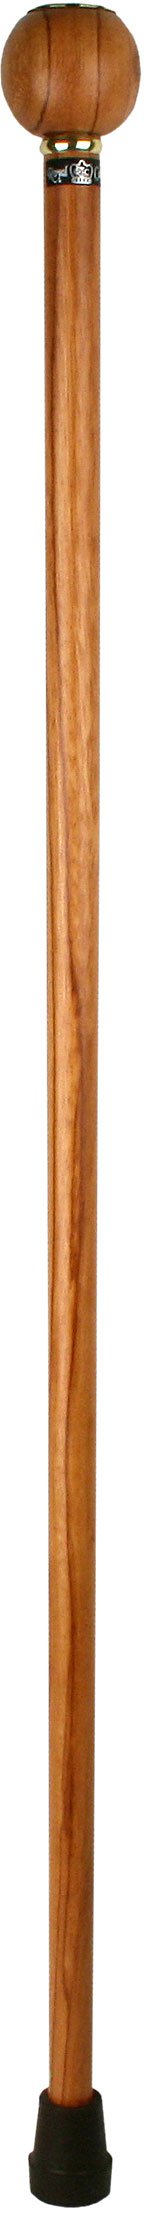 Royal Canes Rosewood Ball Clock Handle Walking Stick With Rosewood Shaft and Brass Collar